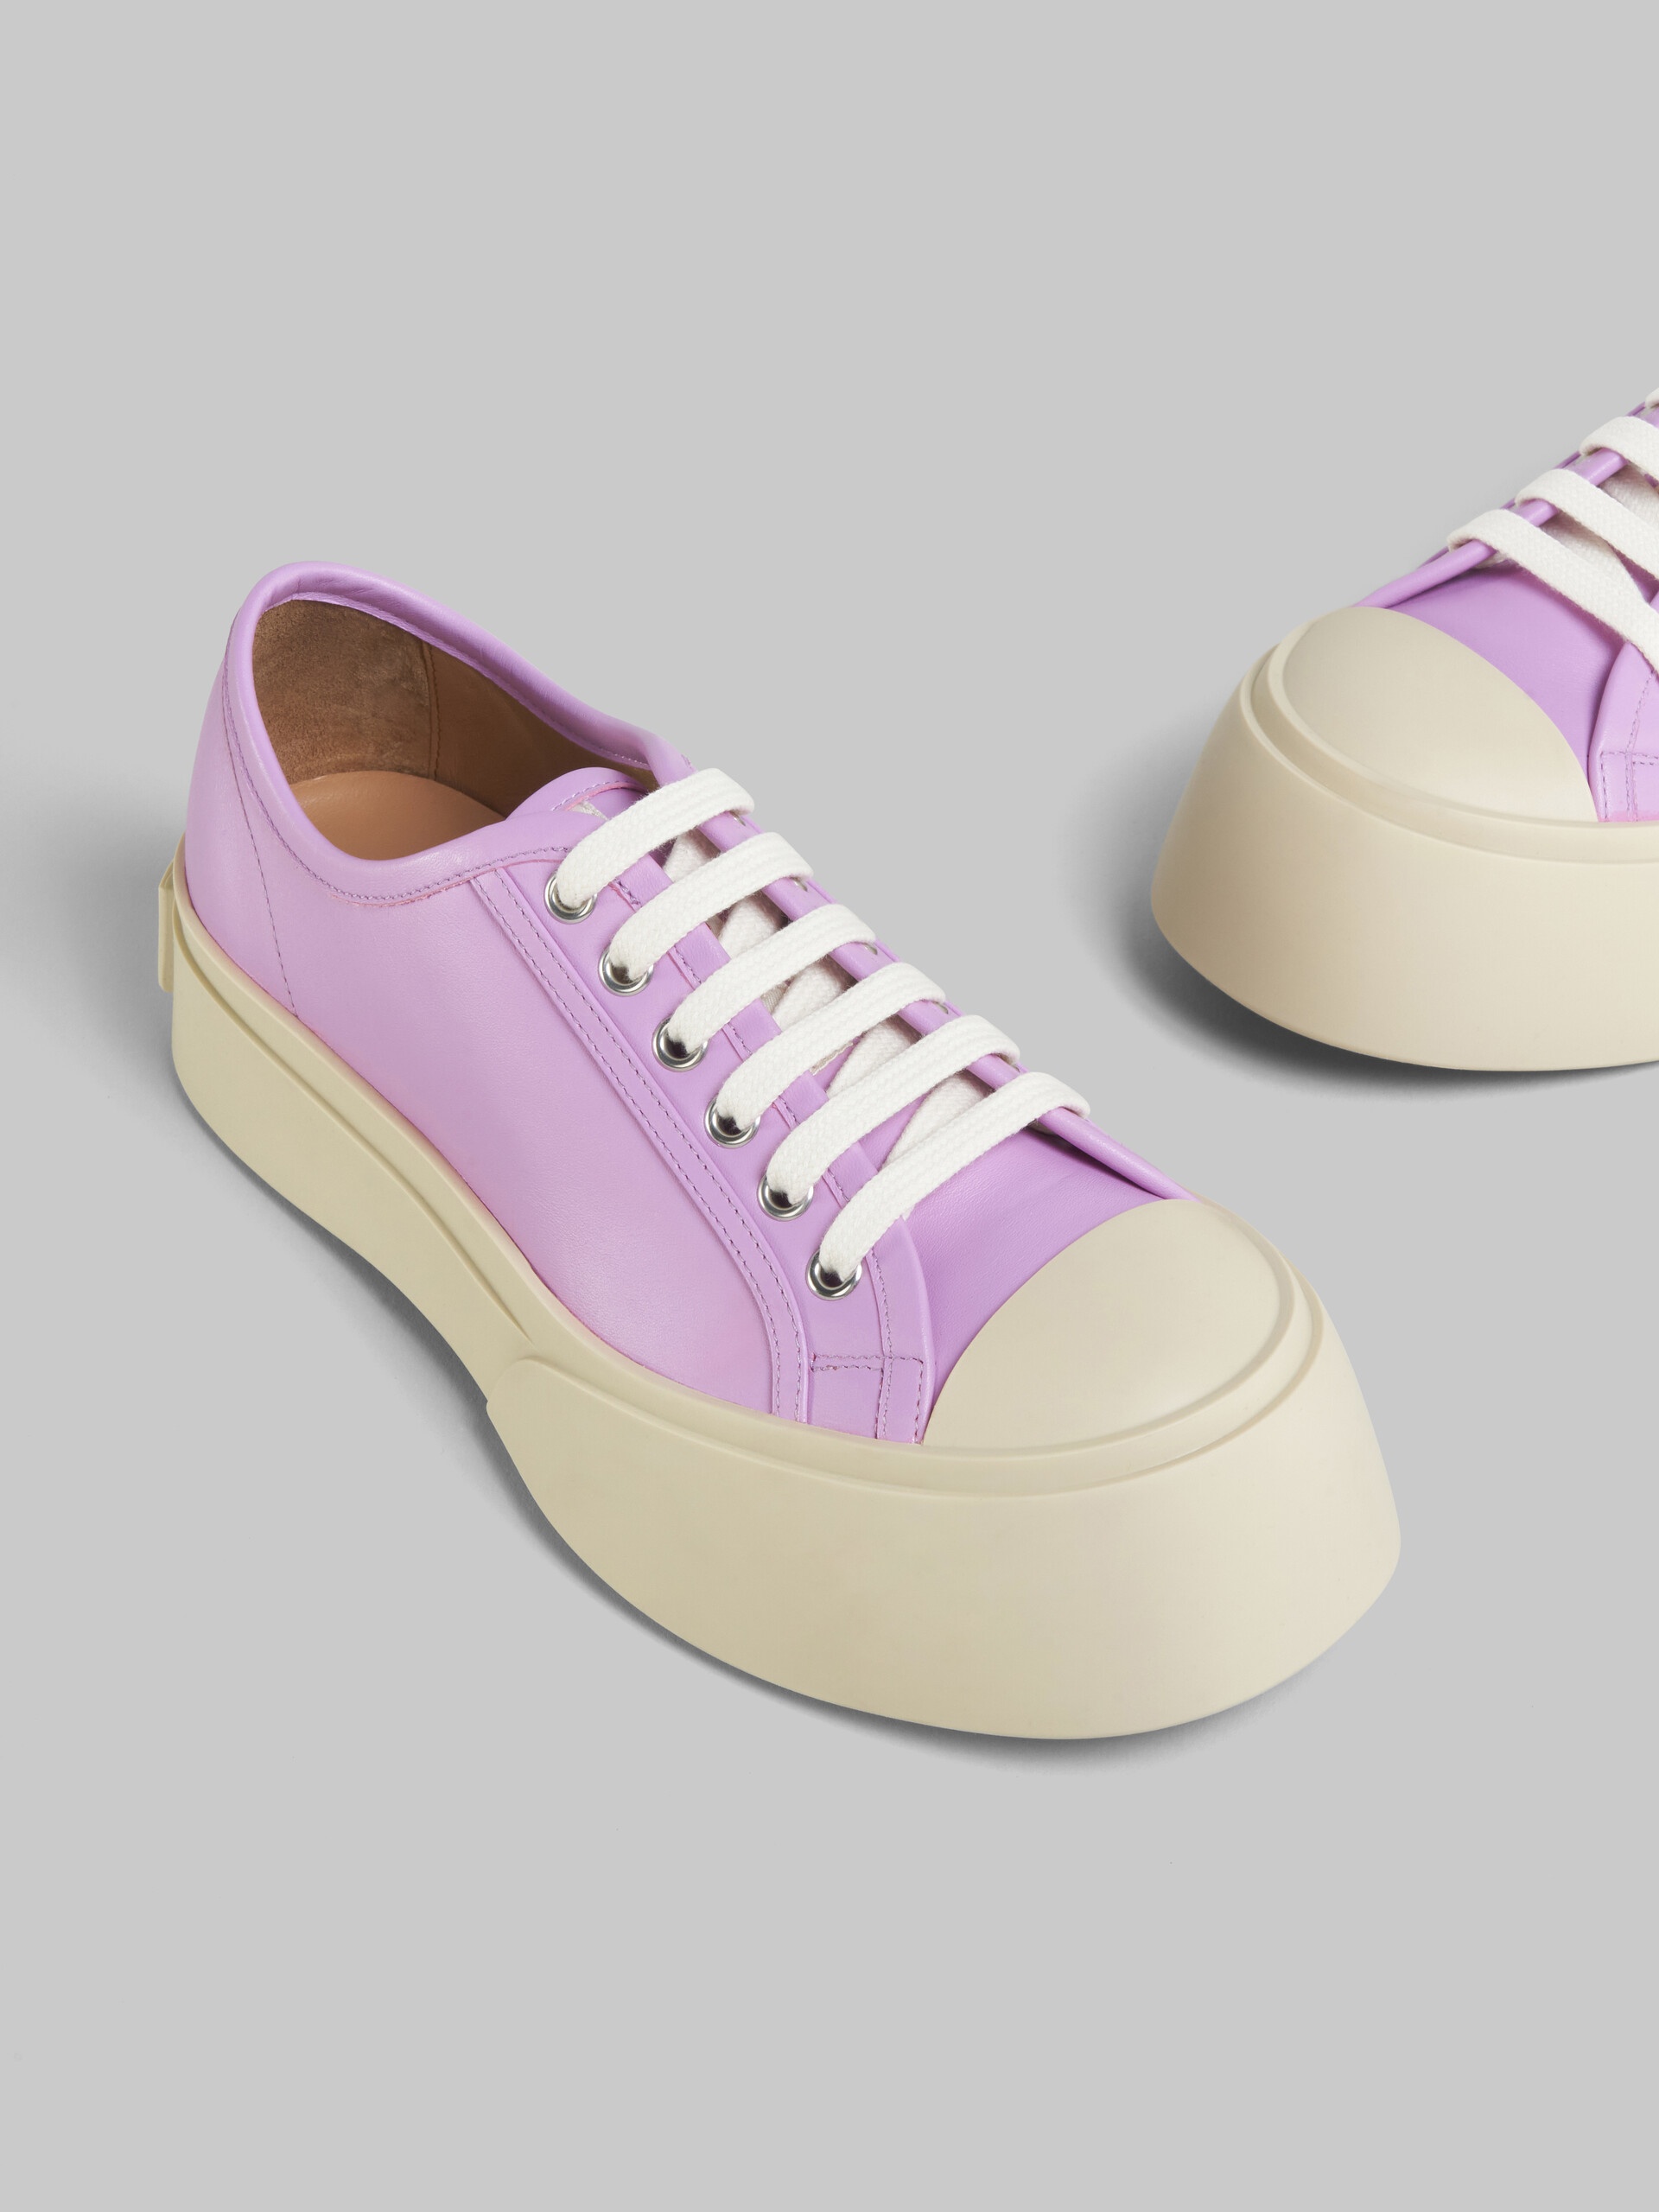 LILAC NAPPA LEATHER PABLO LACE-UP SNEAKER - 5